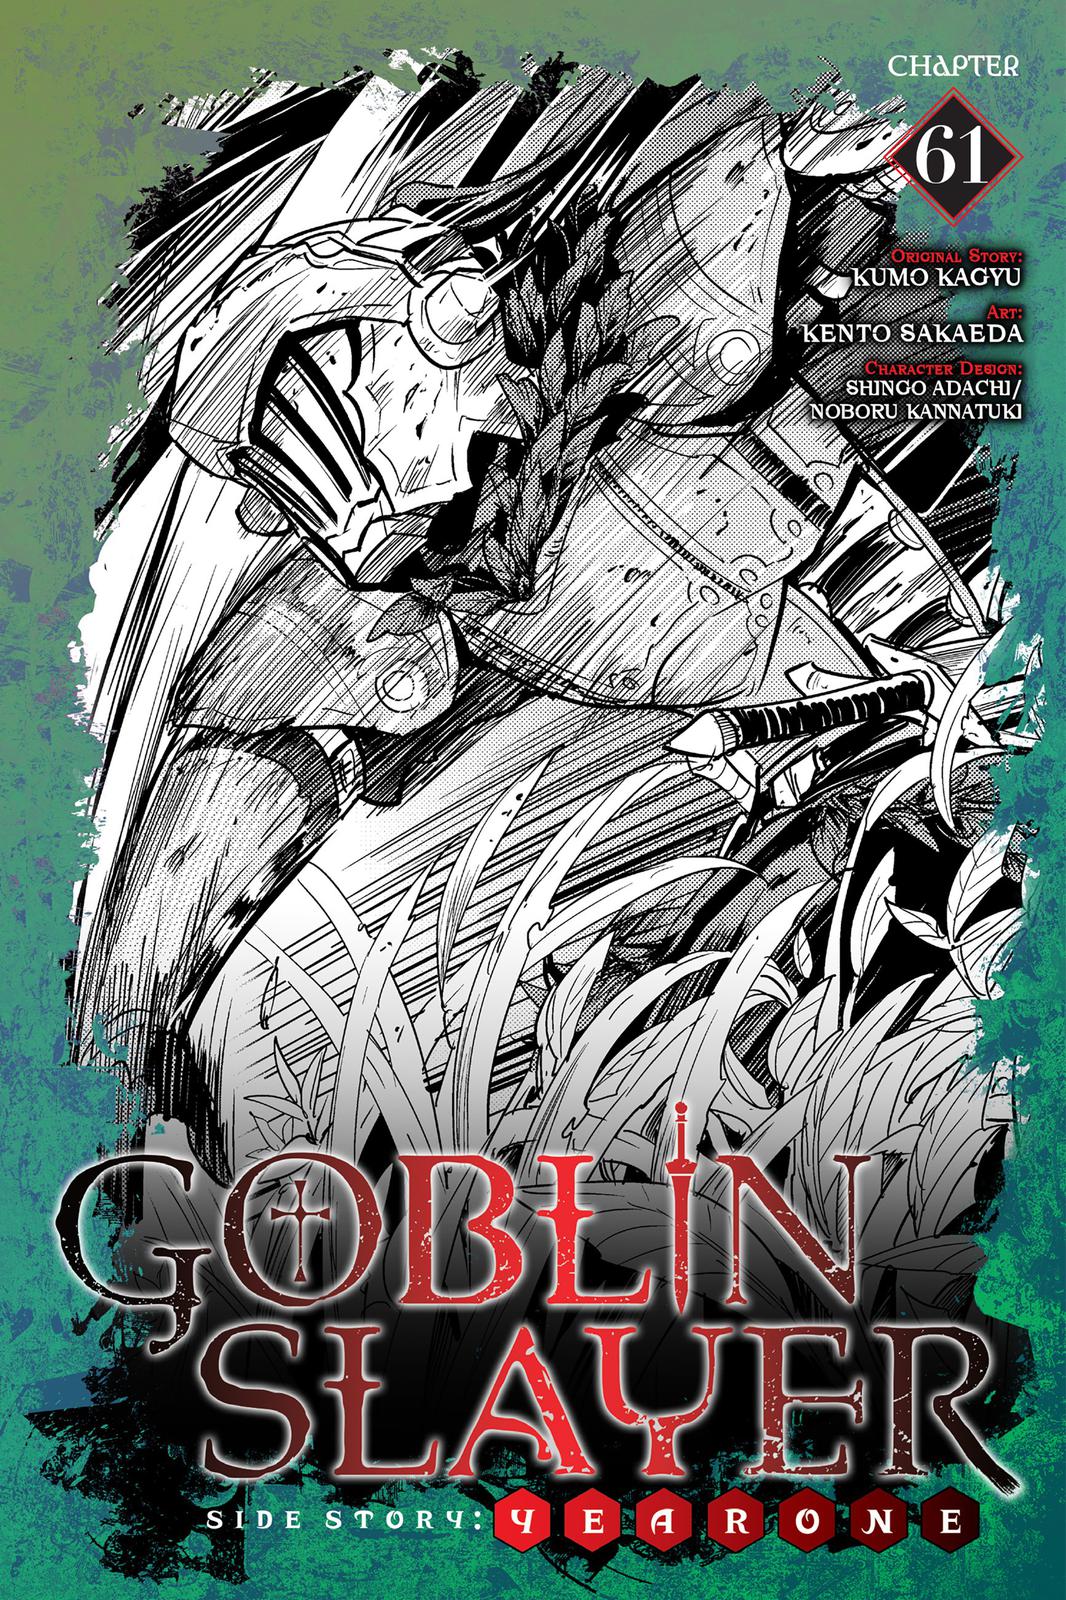 Goblin Slayer: Side Story Year One - Page 1